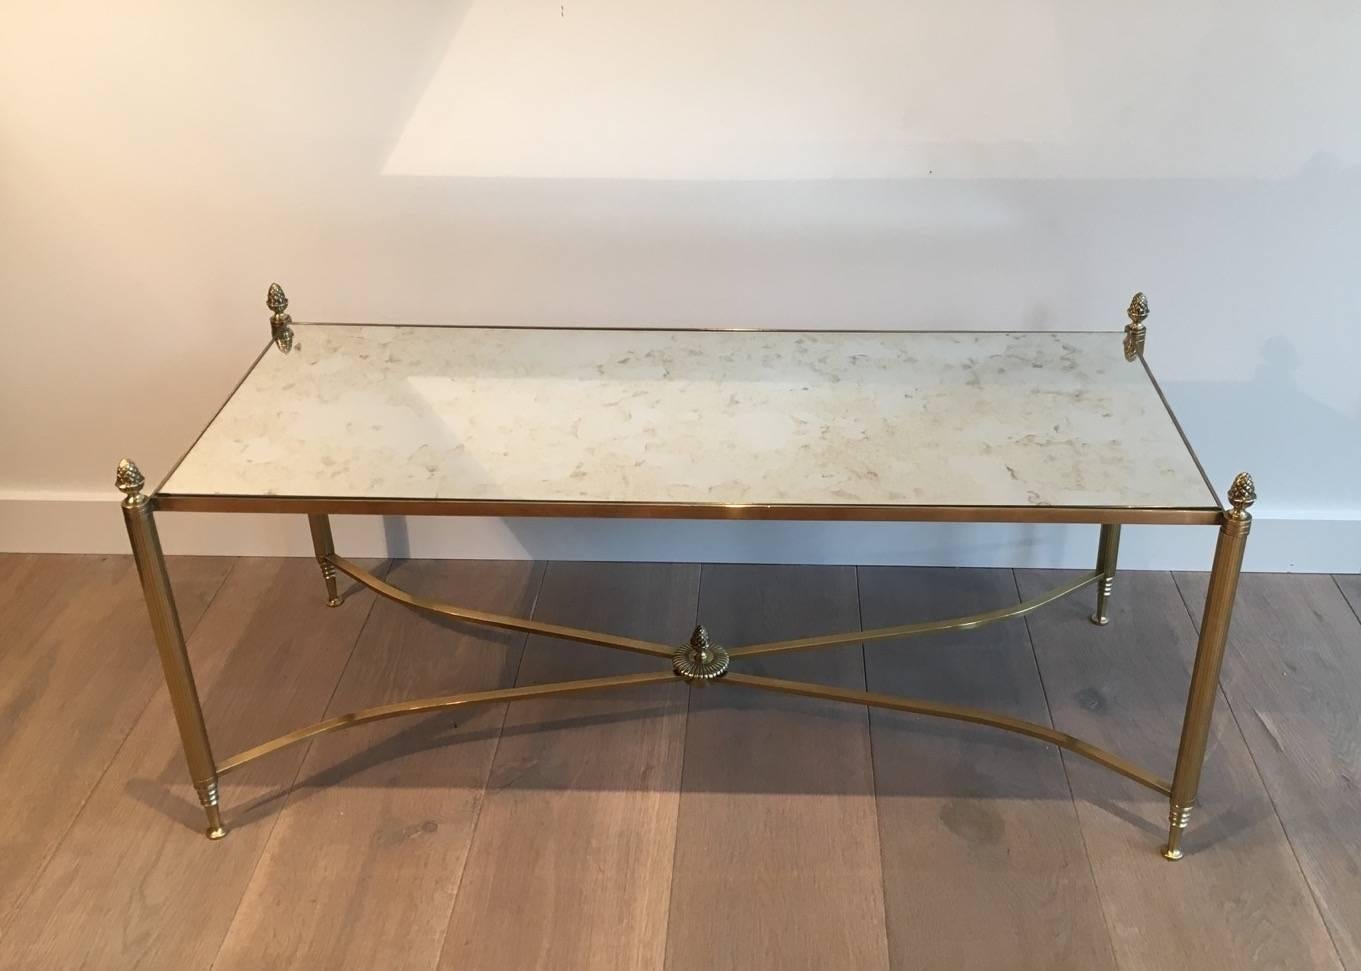 Bronze and brass coffee table with pine cone decorations  attributed to Maison Bagués. French, circa 1940s.

This item is currently in France, please allow 2 to 4 weeks delivery to New York. Shipping costs from France to our warehouse in New York